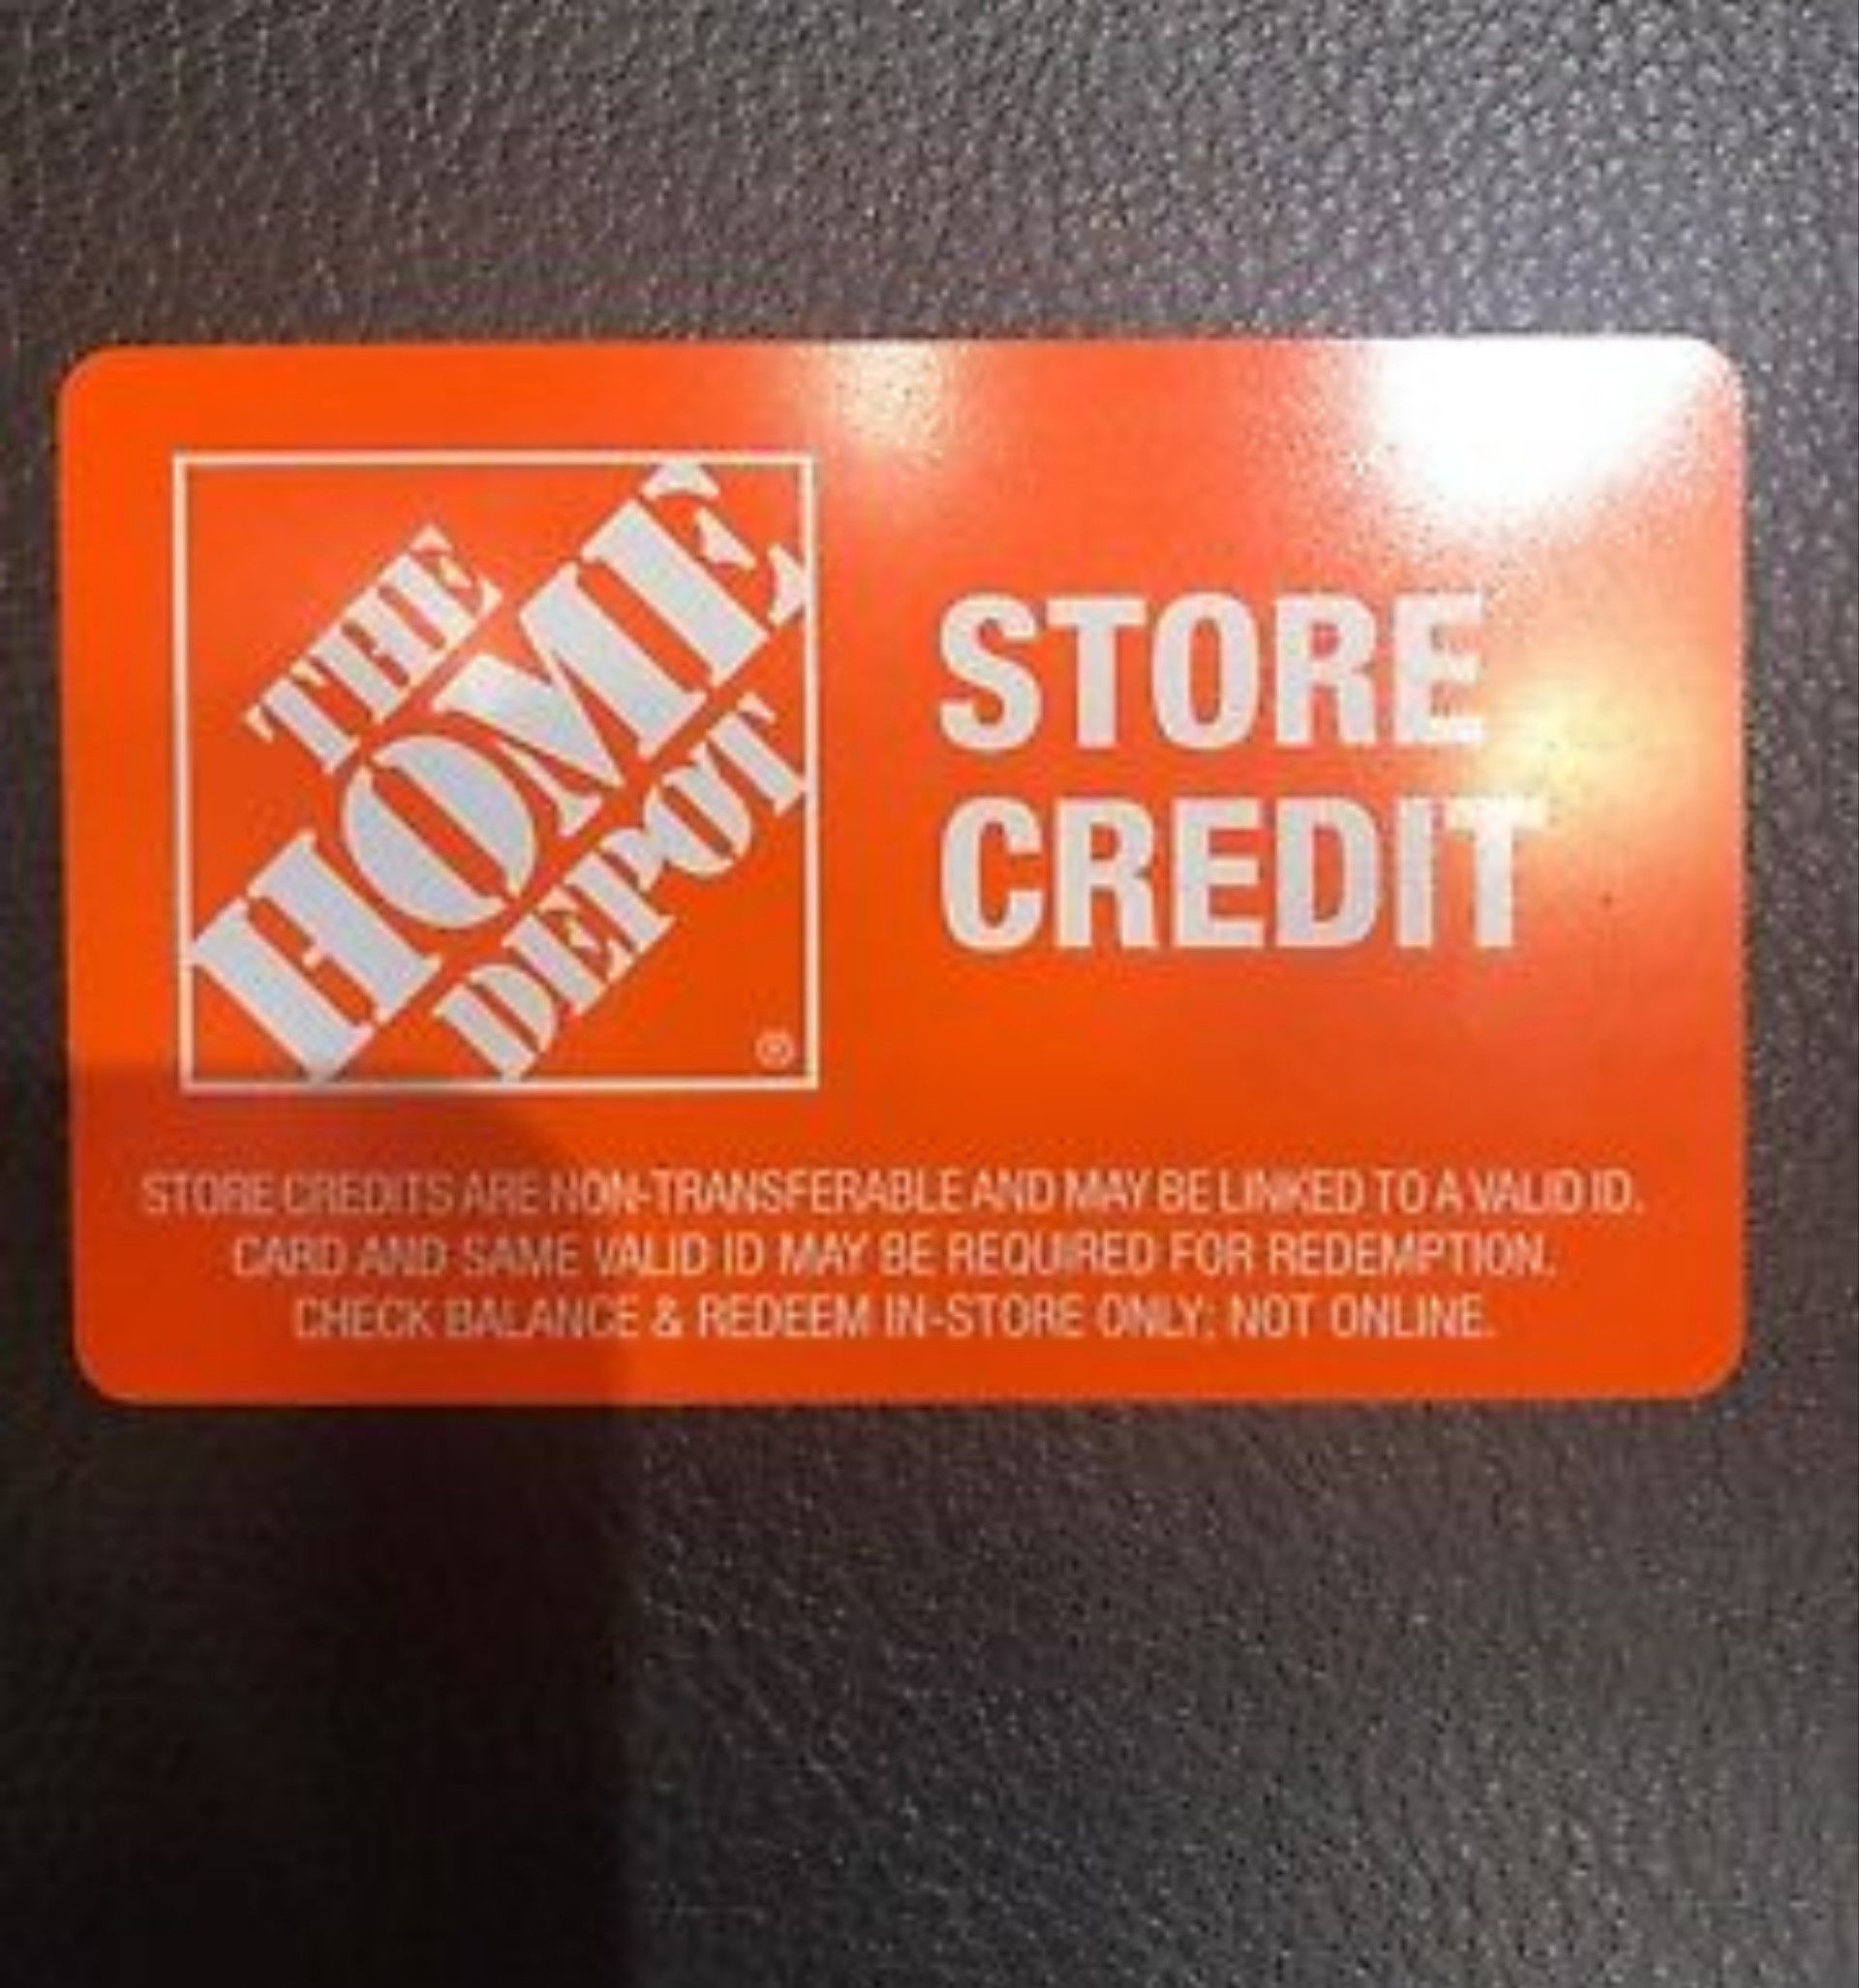 How to Check Your Home Depot Credit Card Balance - HammerZen